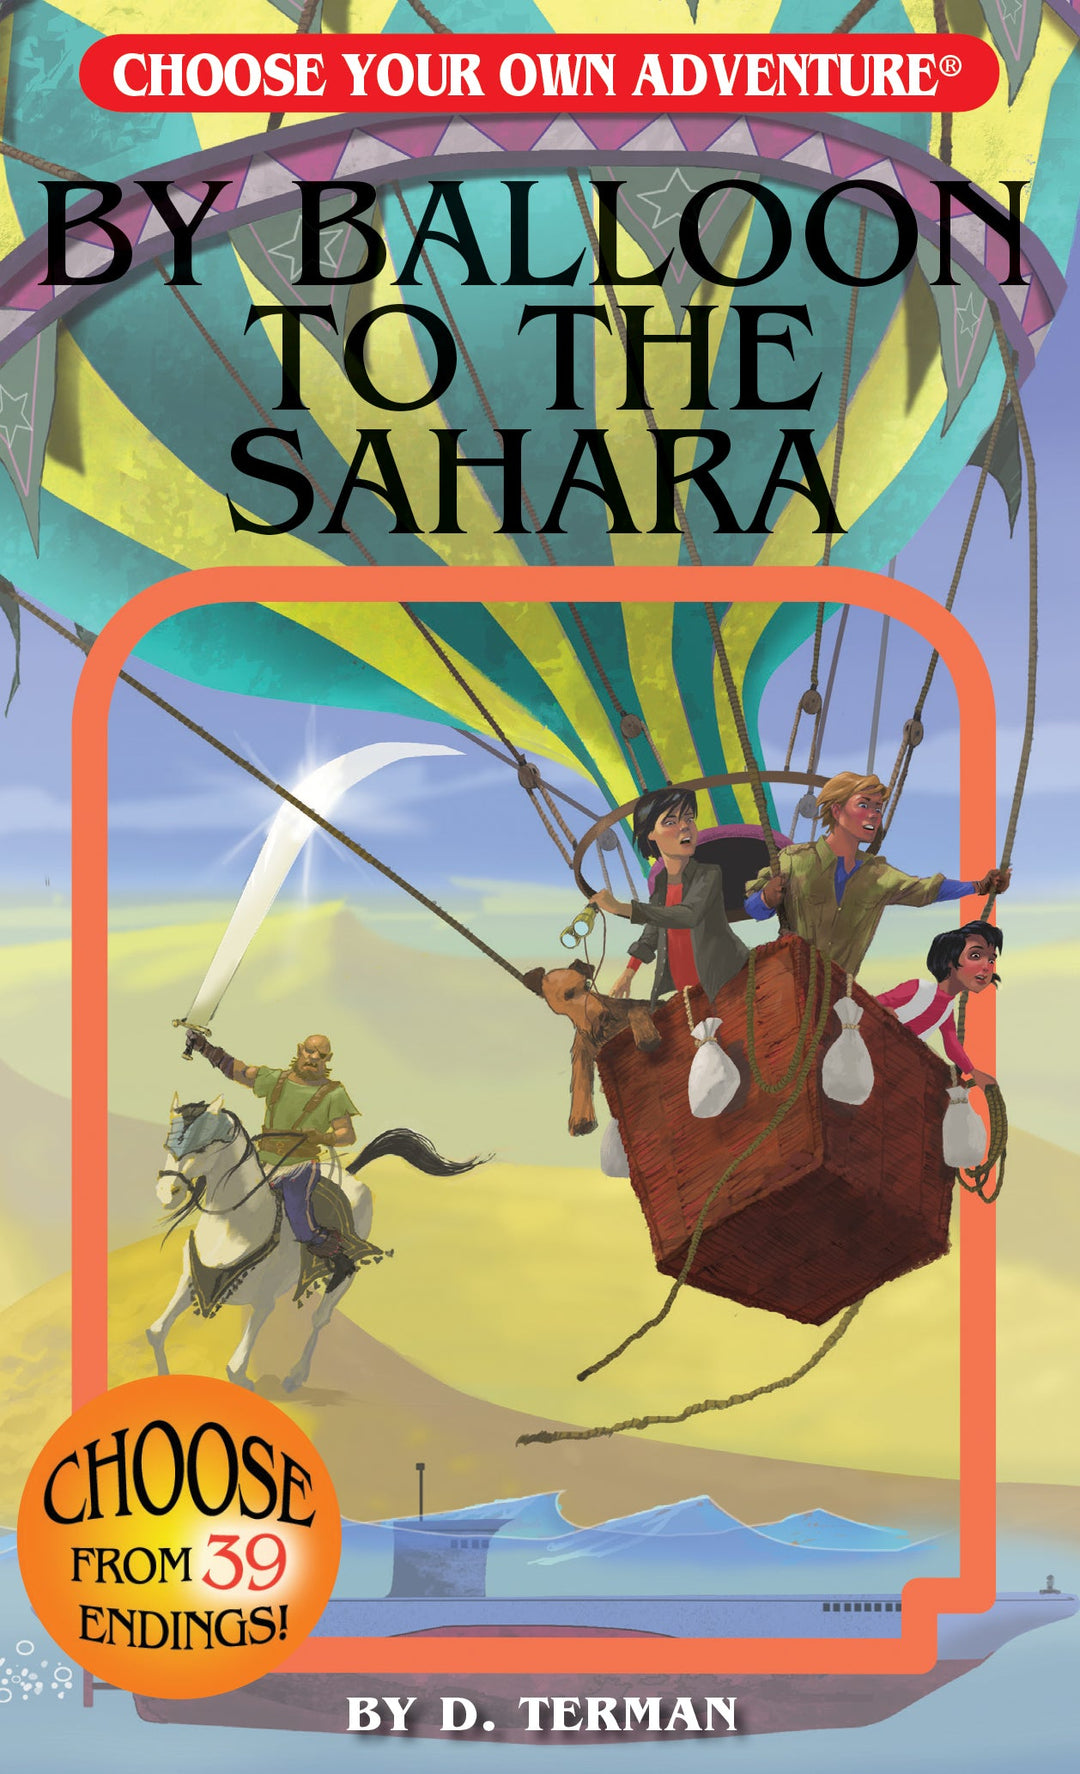 By Balloon To The Sahara - Choose Your Own Adventure